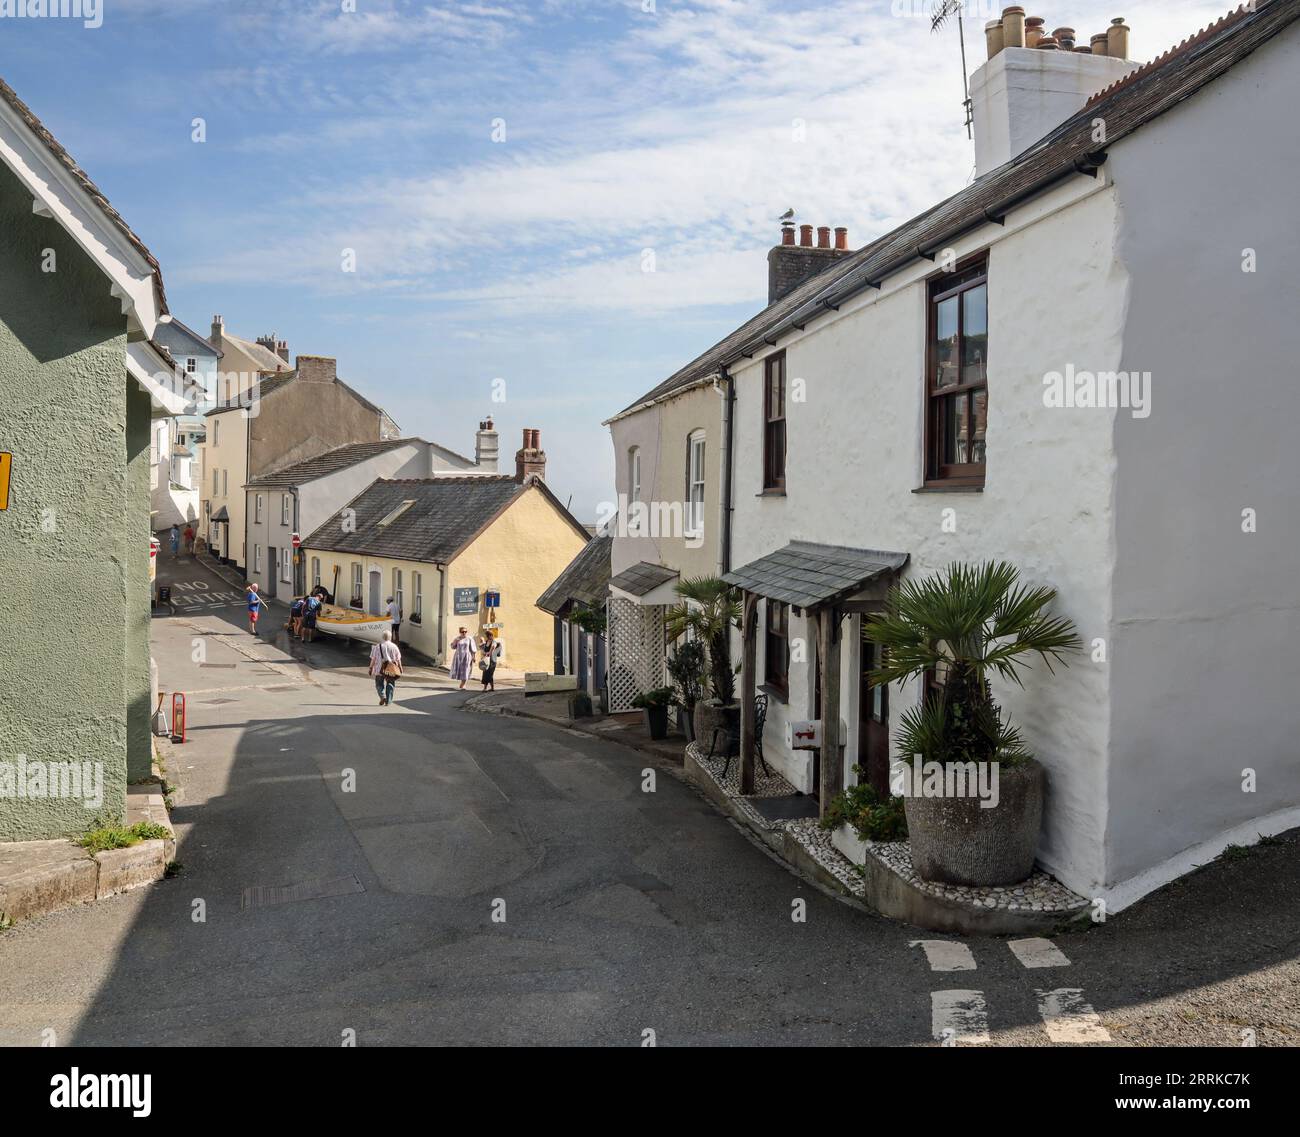 Cawsand Square in south east Cornwall on the often overlooked Rame Peninsula. In the distance a team givng maintainance to the Maker Wave gig boat. Stock Photo